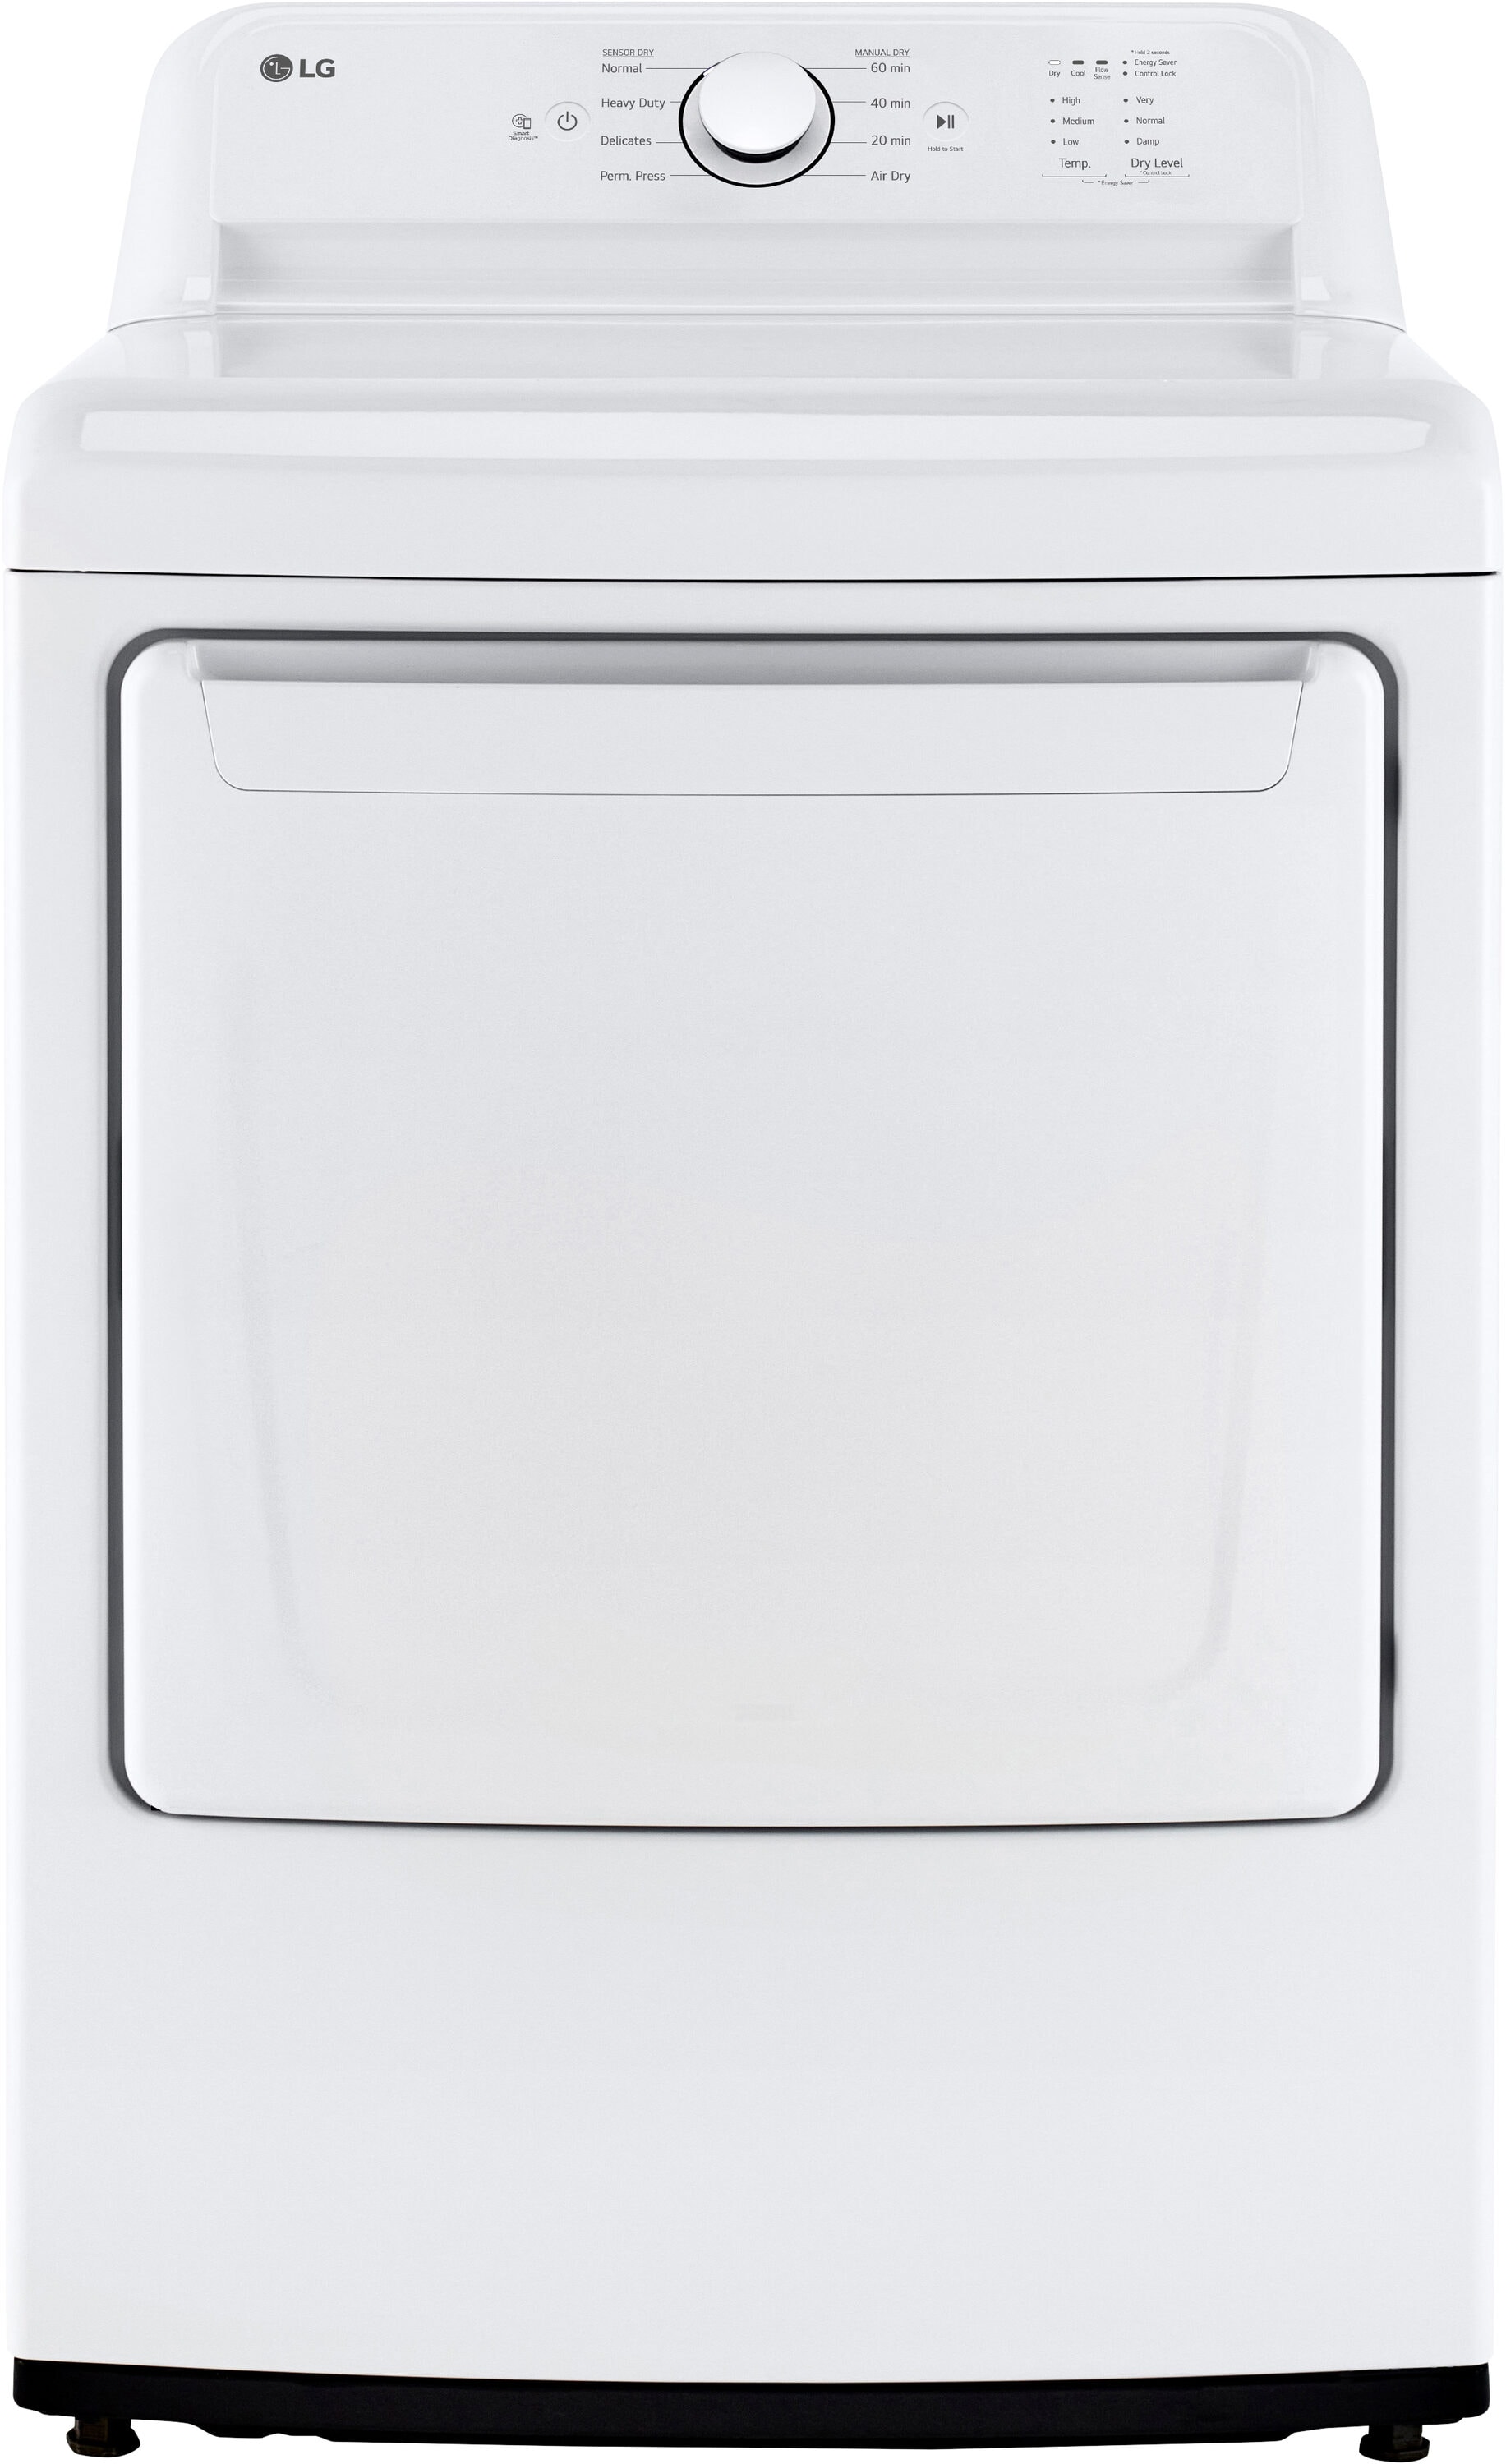 LG 7.3-cu ft Electric Dryer (White) ENERGY STAR in the Electric